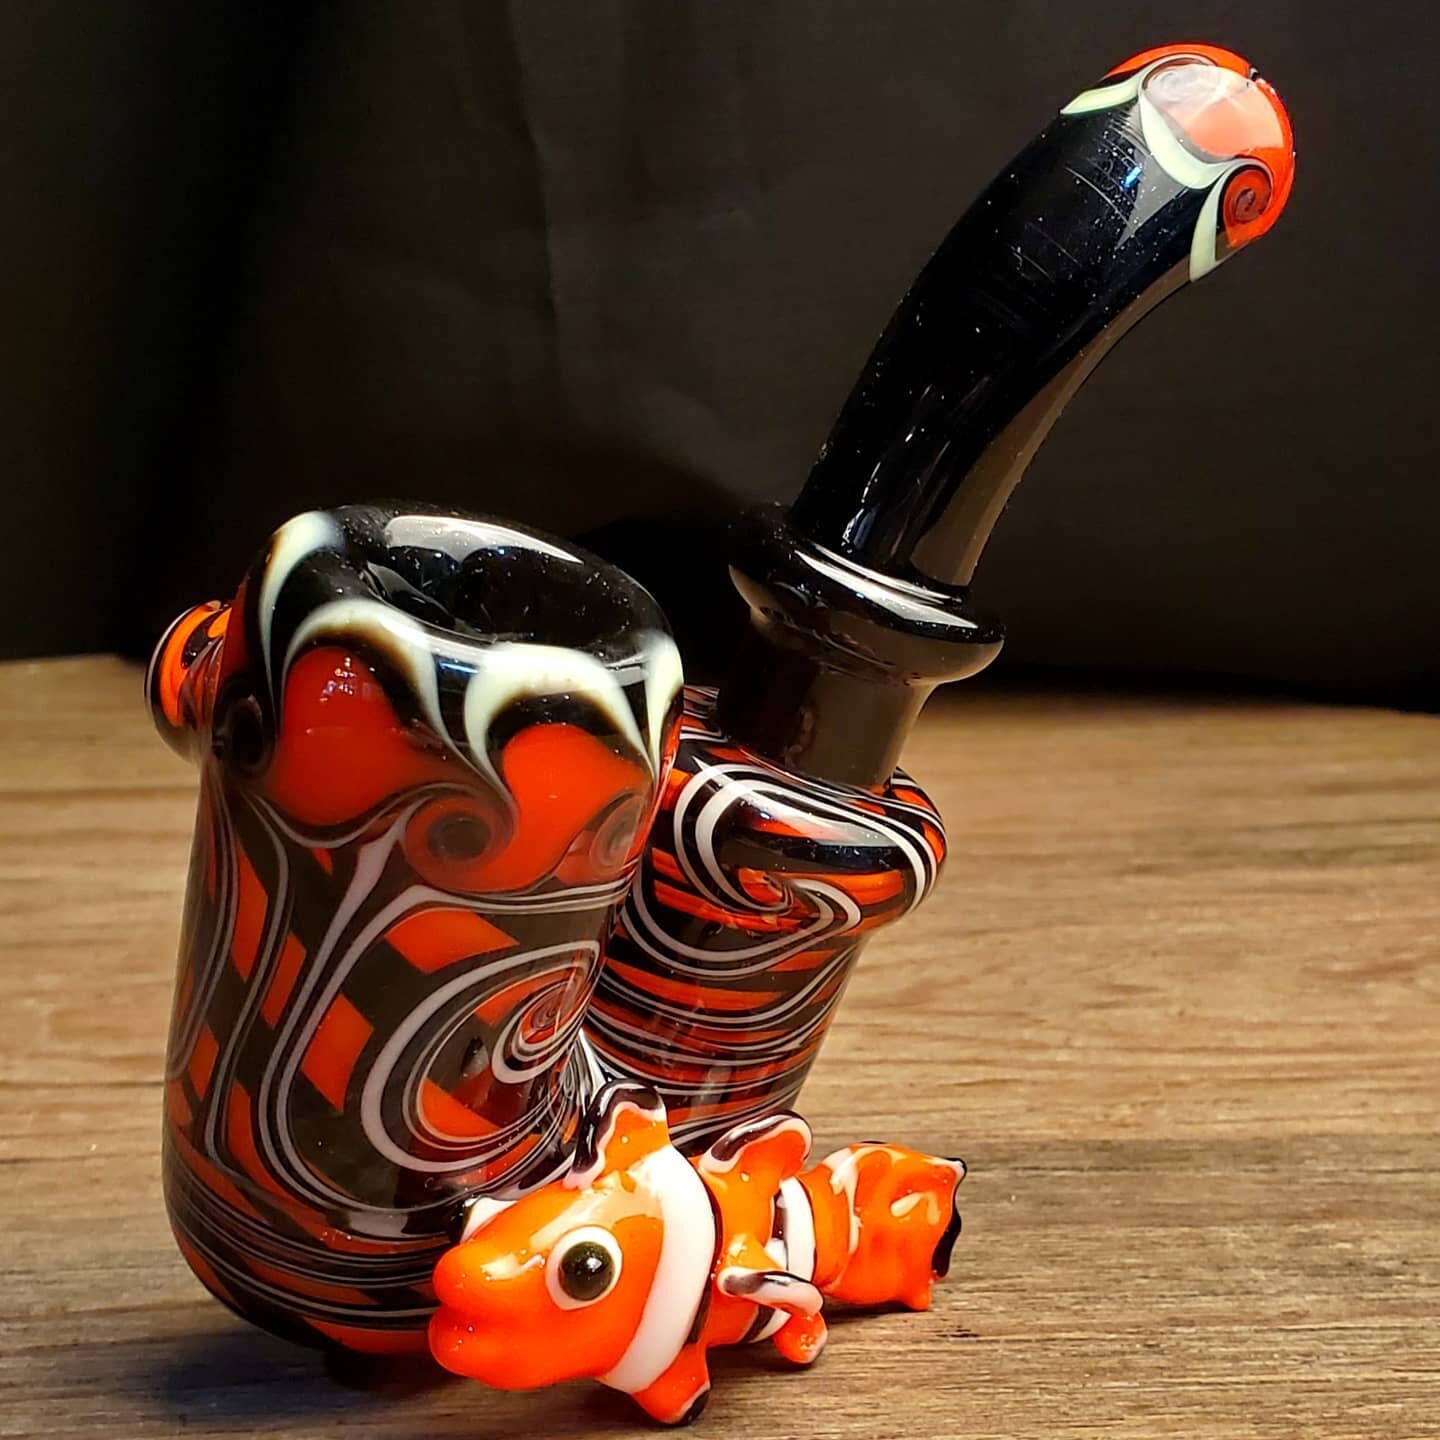 Lil' custom cool-ab double layer nemo-lock !!
Awesome  nemo sculpture by @embersoulshineglass  brings this classic style to life!!
What makes your soulshine???? We're excited to make something custom for you!!!!!
#soulshineartsstudio
#humboldtglasssc